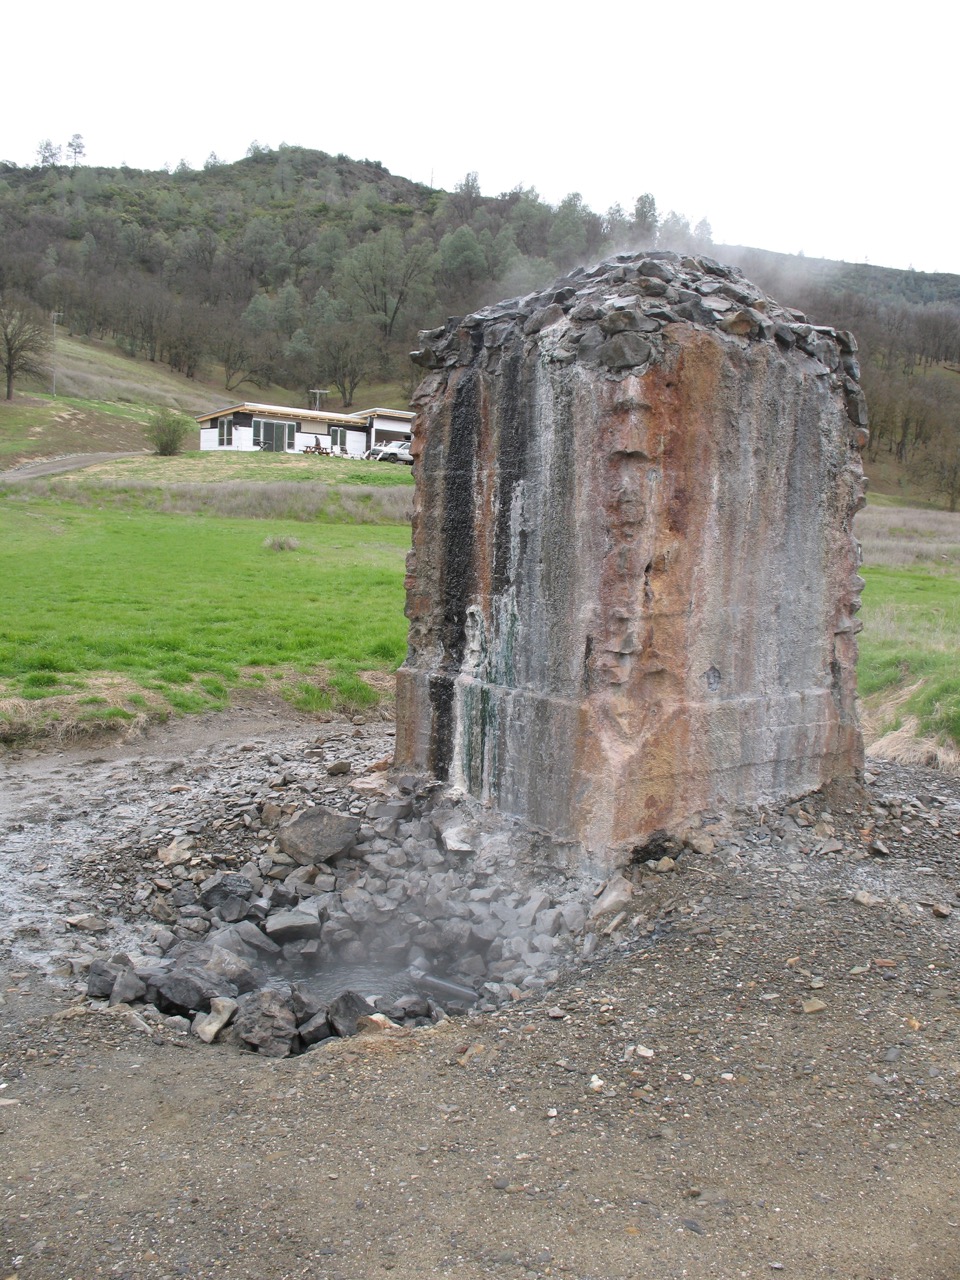 Existing geyser monolith and hot spring